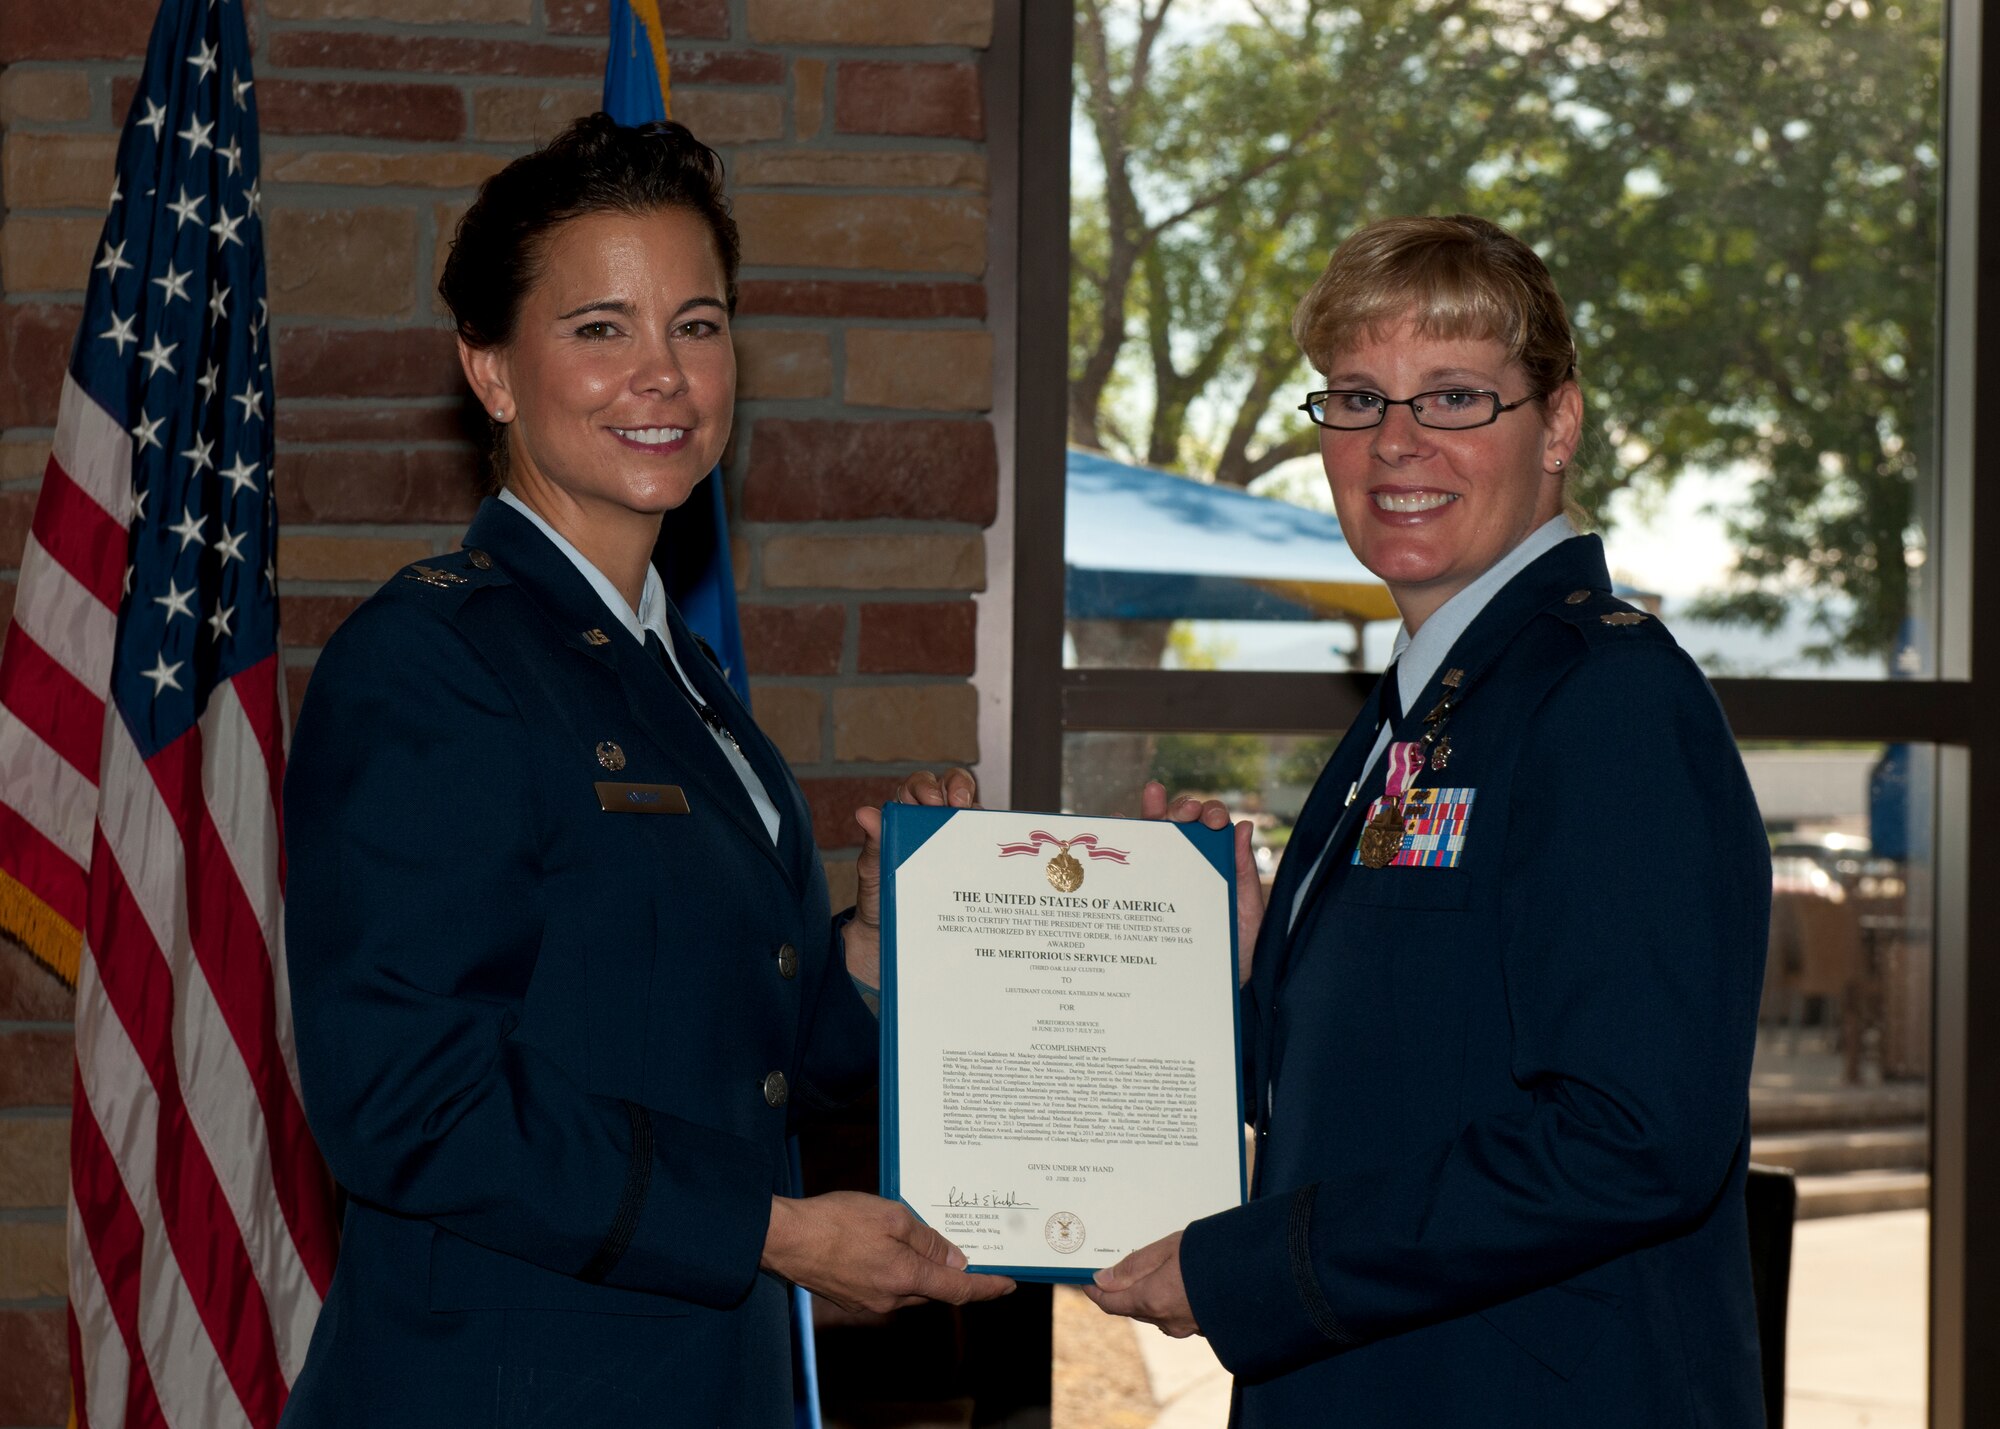 Col. Leslie A. Knight, the 49th Medical Group commander, presents Lt. Col. Kathleen Mackey, the outgoing 49th Medical Support Squadron commander, with an Air Force Meritorious Service Medal on Holloman Air Force Base, N.M., July 7, 2015. Knight was the presiding officer over the formal change of command ceremony where Mackey relinquished command to Lt. Col. Elbert Alford. The 49th MDSS has 77 active duty and civilian personnel who maintain the operation of all medical support activities, medical readiness items, facility management, and pharmacy operations. (U.S. Air Force photo by Senior Airman Chase Cannon/Released)